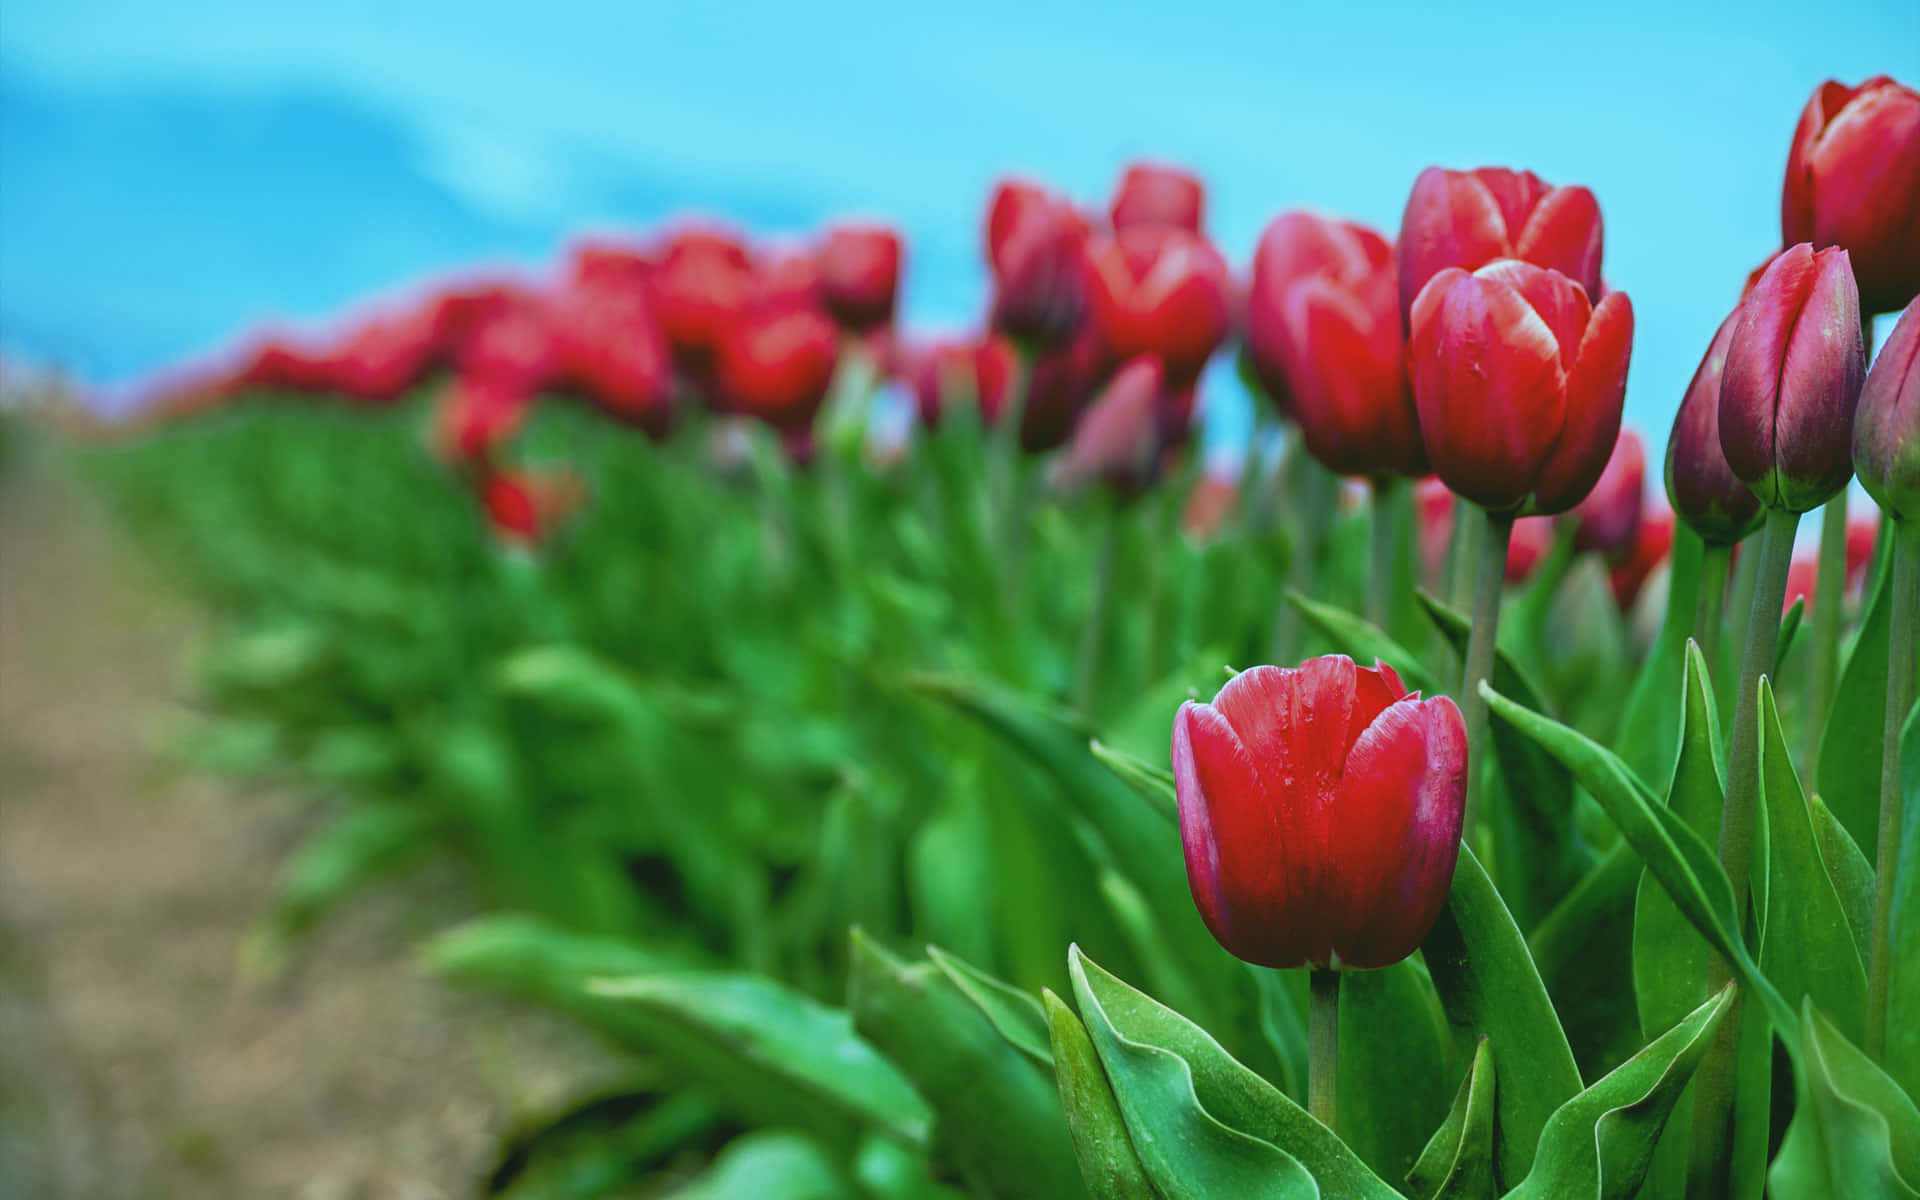 A Field Of Red Tulips In The Field